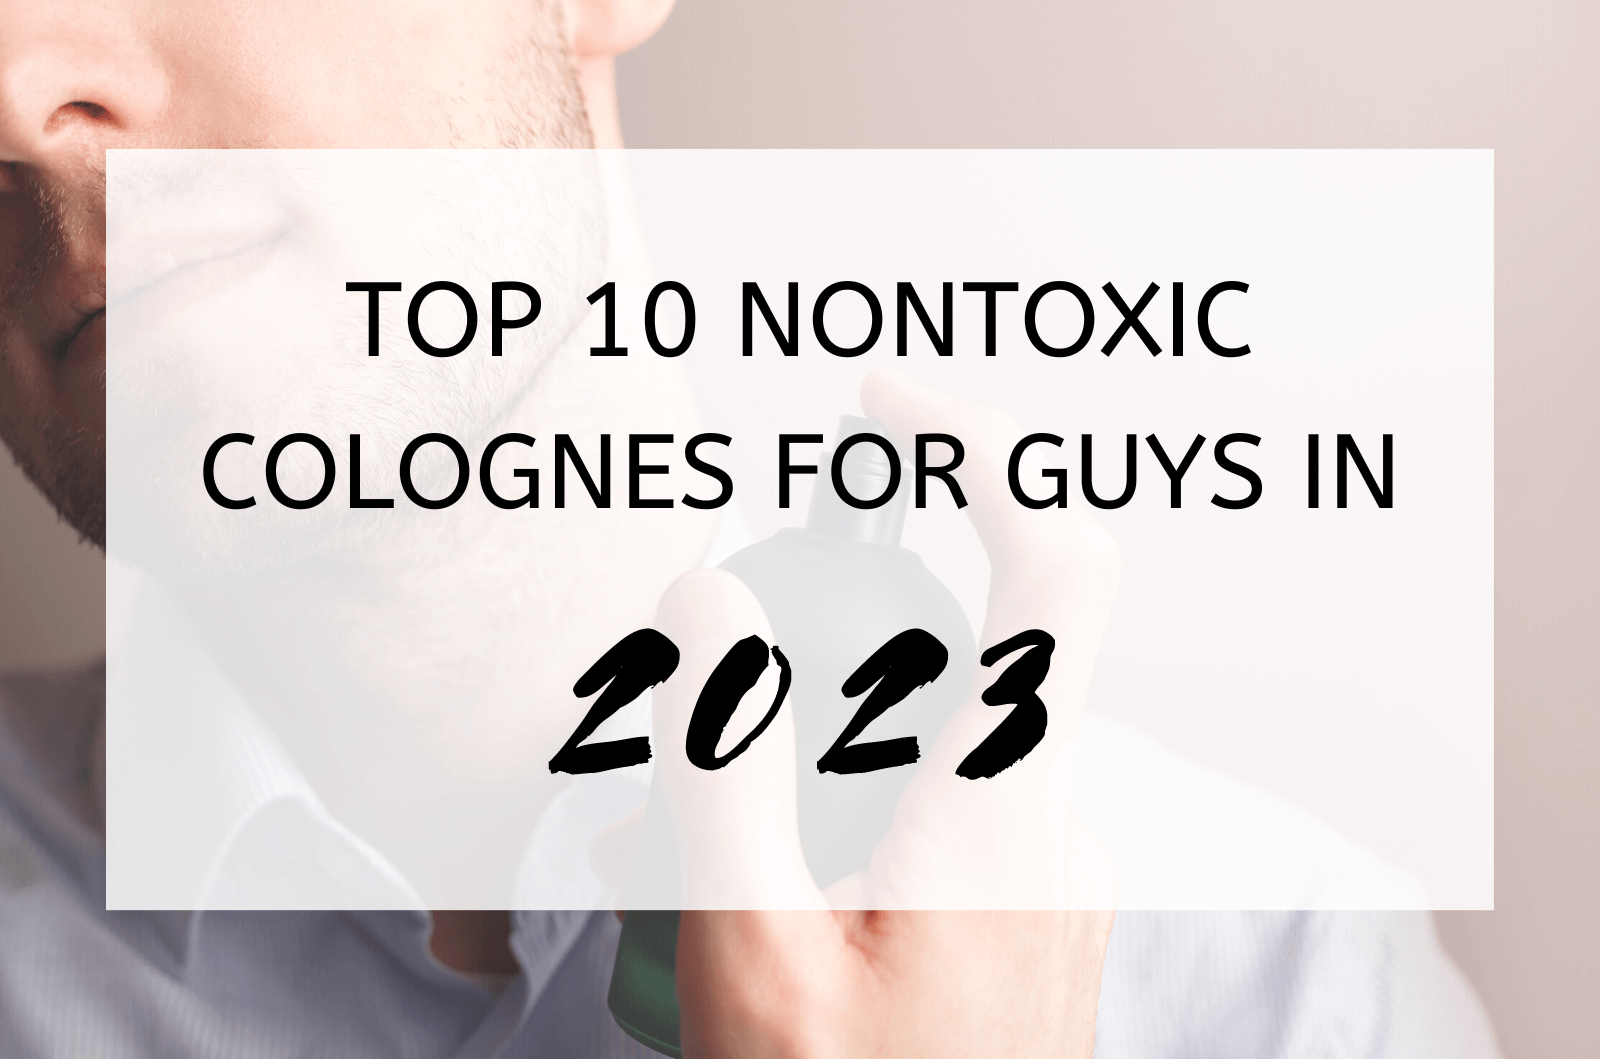 Top 10 Nontoxic Colognes For Guys In 2023